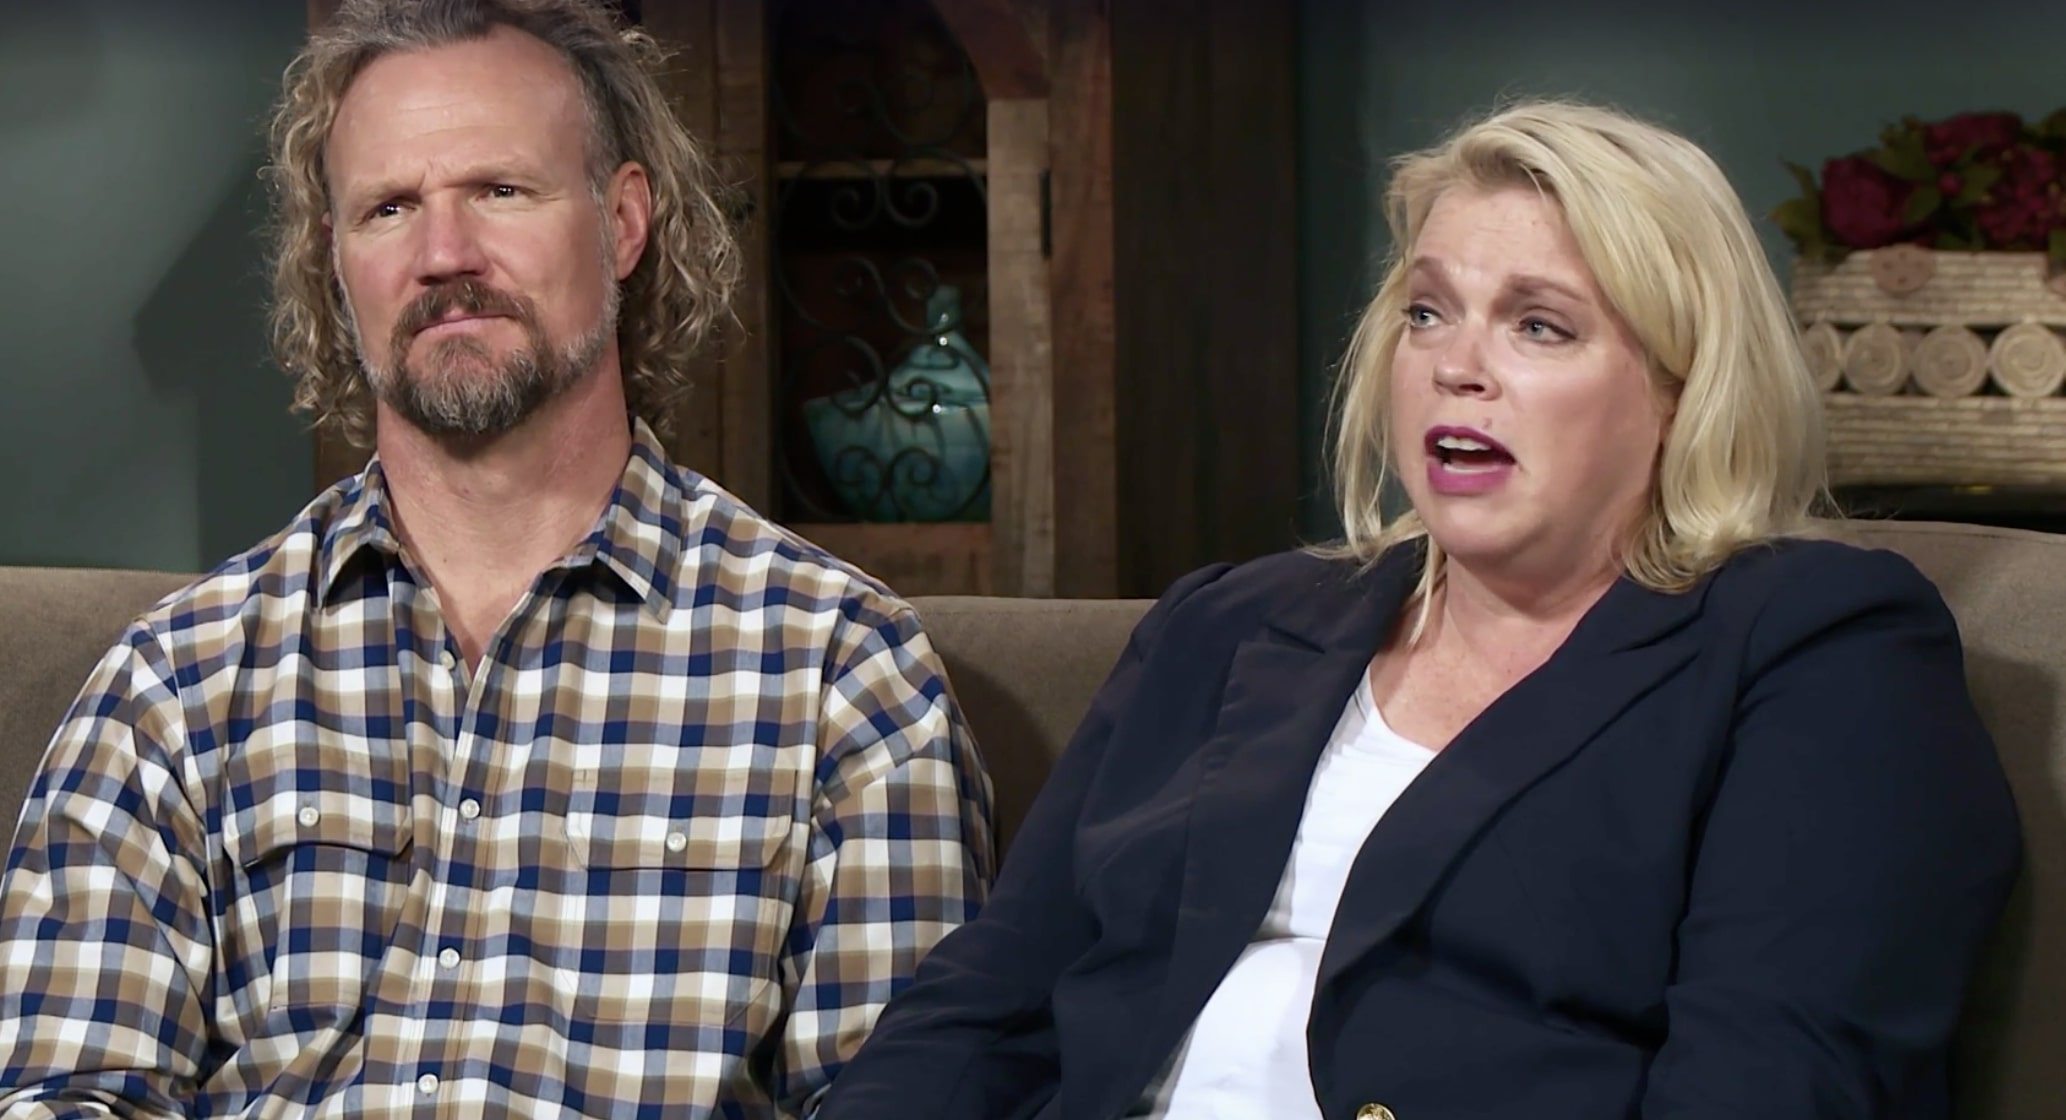 Sister Wives Janelle Brown Hints About Being Unhappy With Kody In A Polygamous Relationship